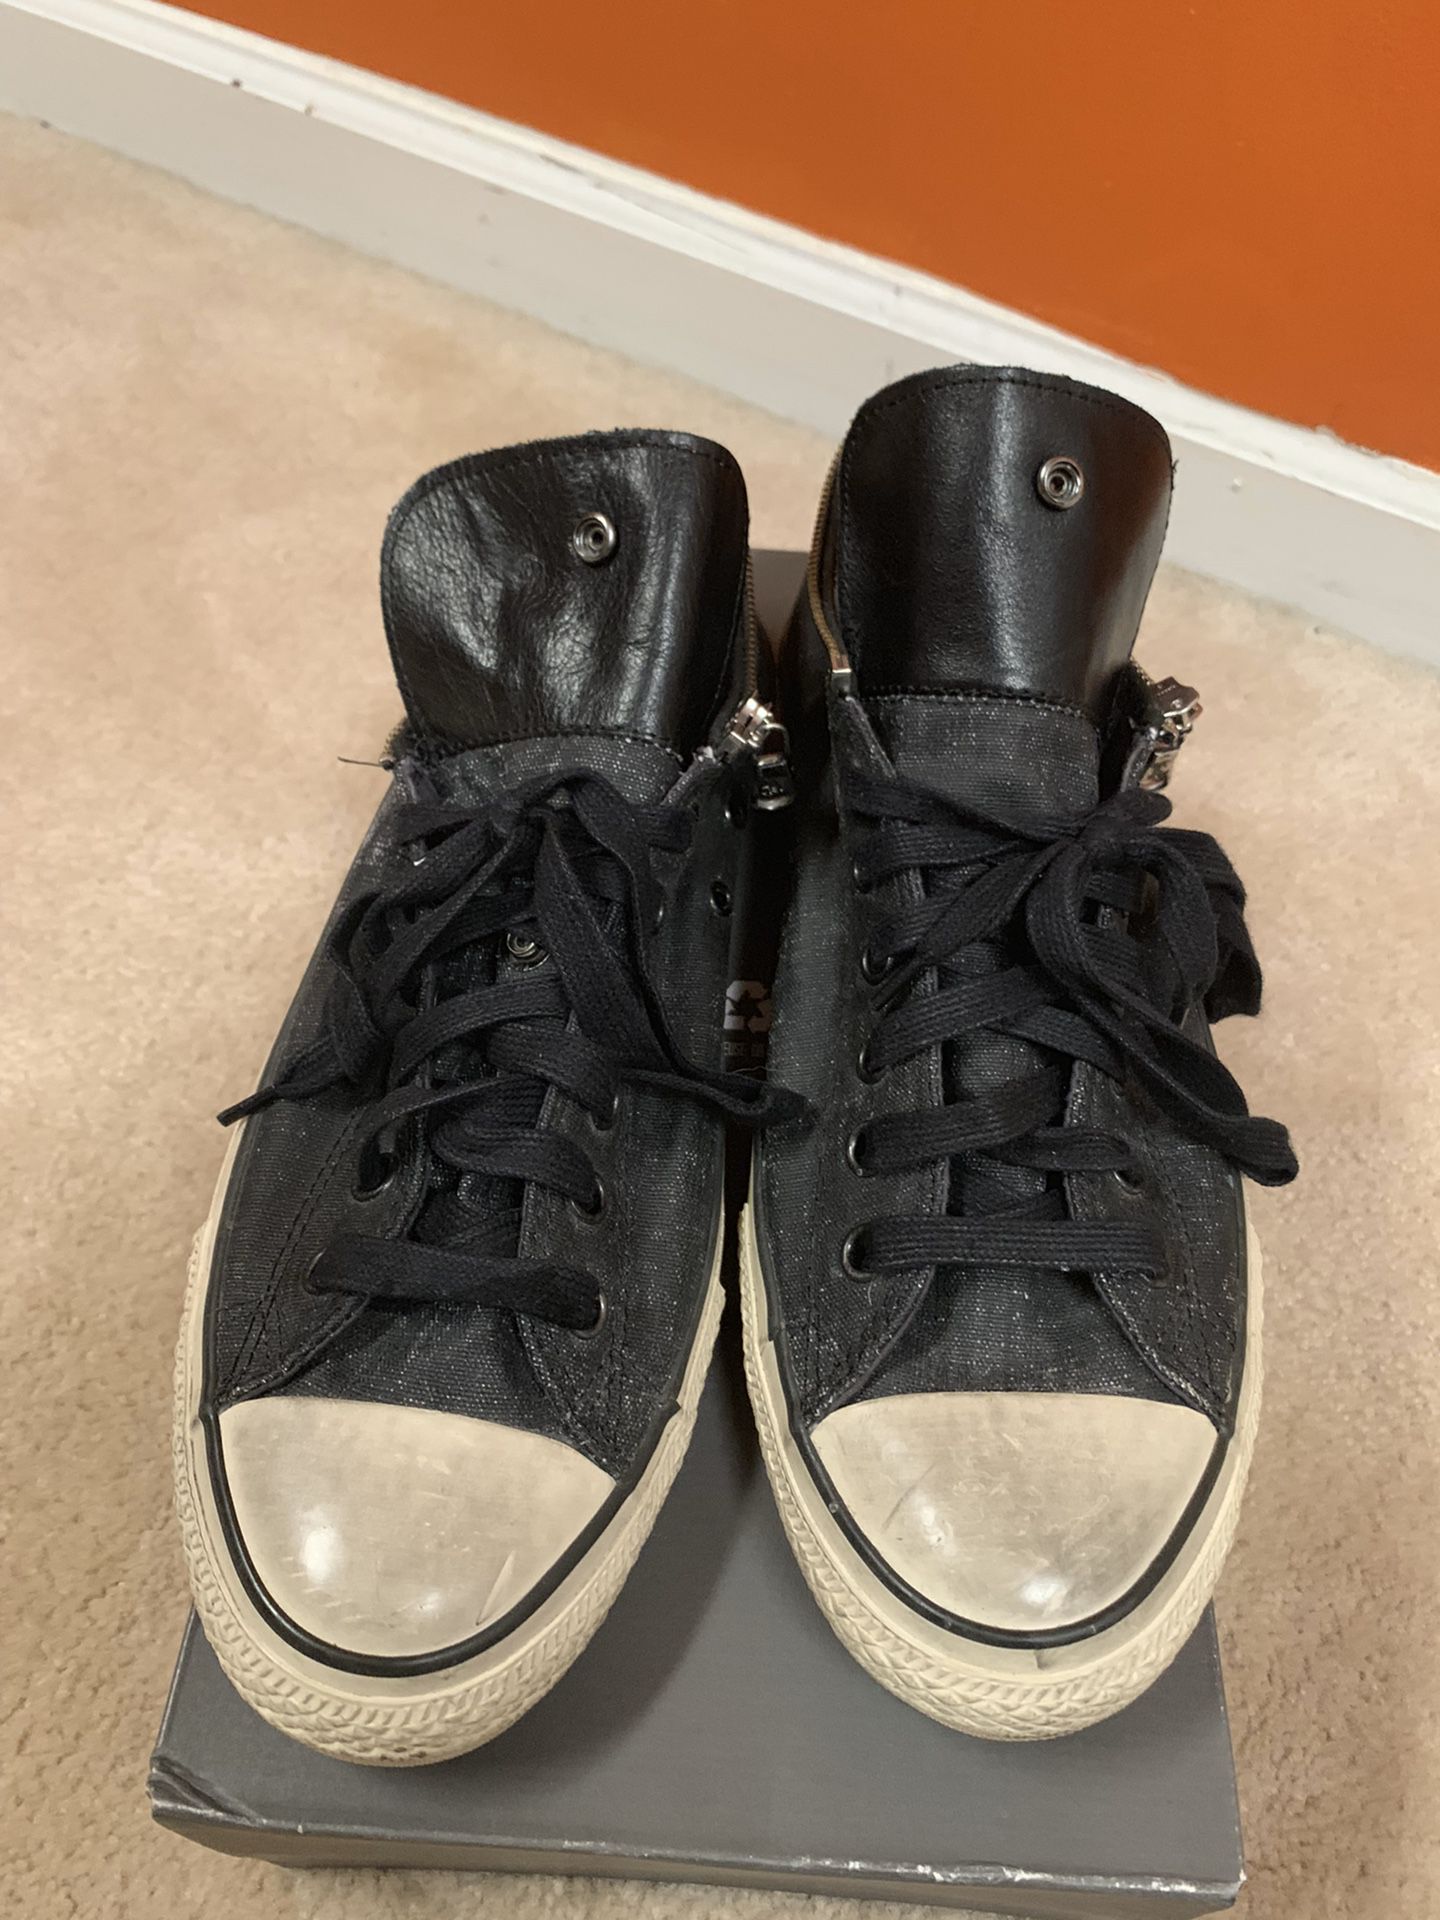 All Star “Studded” Converse - John Varvatos size 10.5 (real fit size 12)